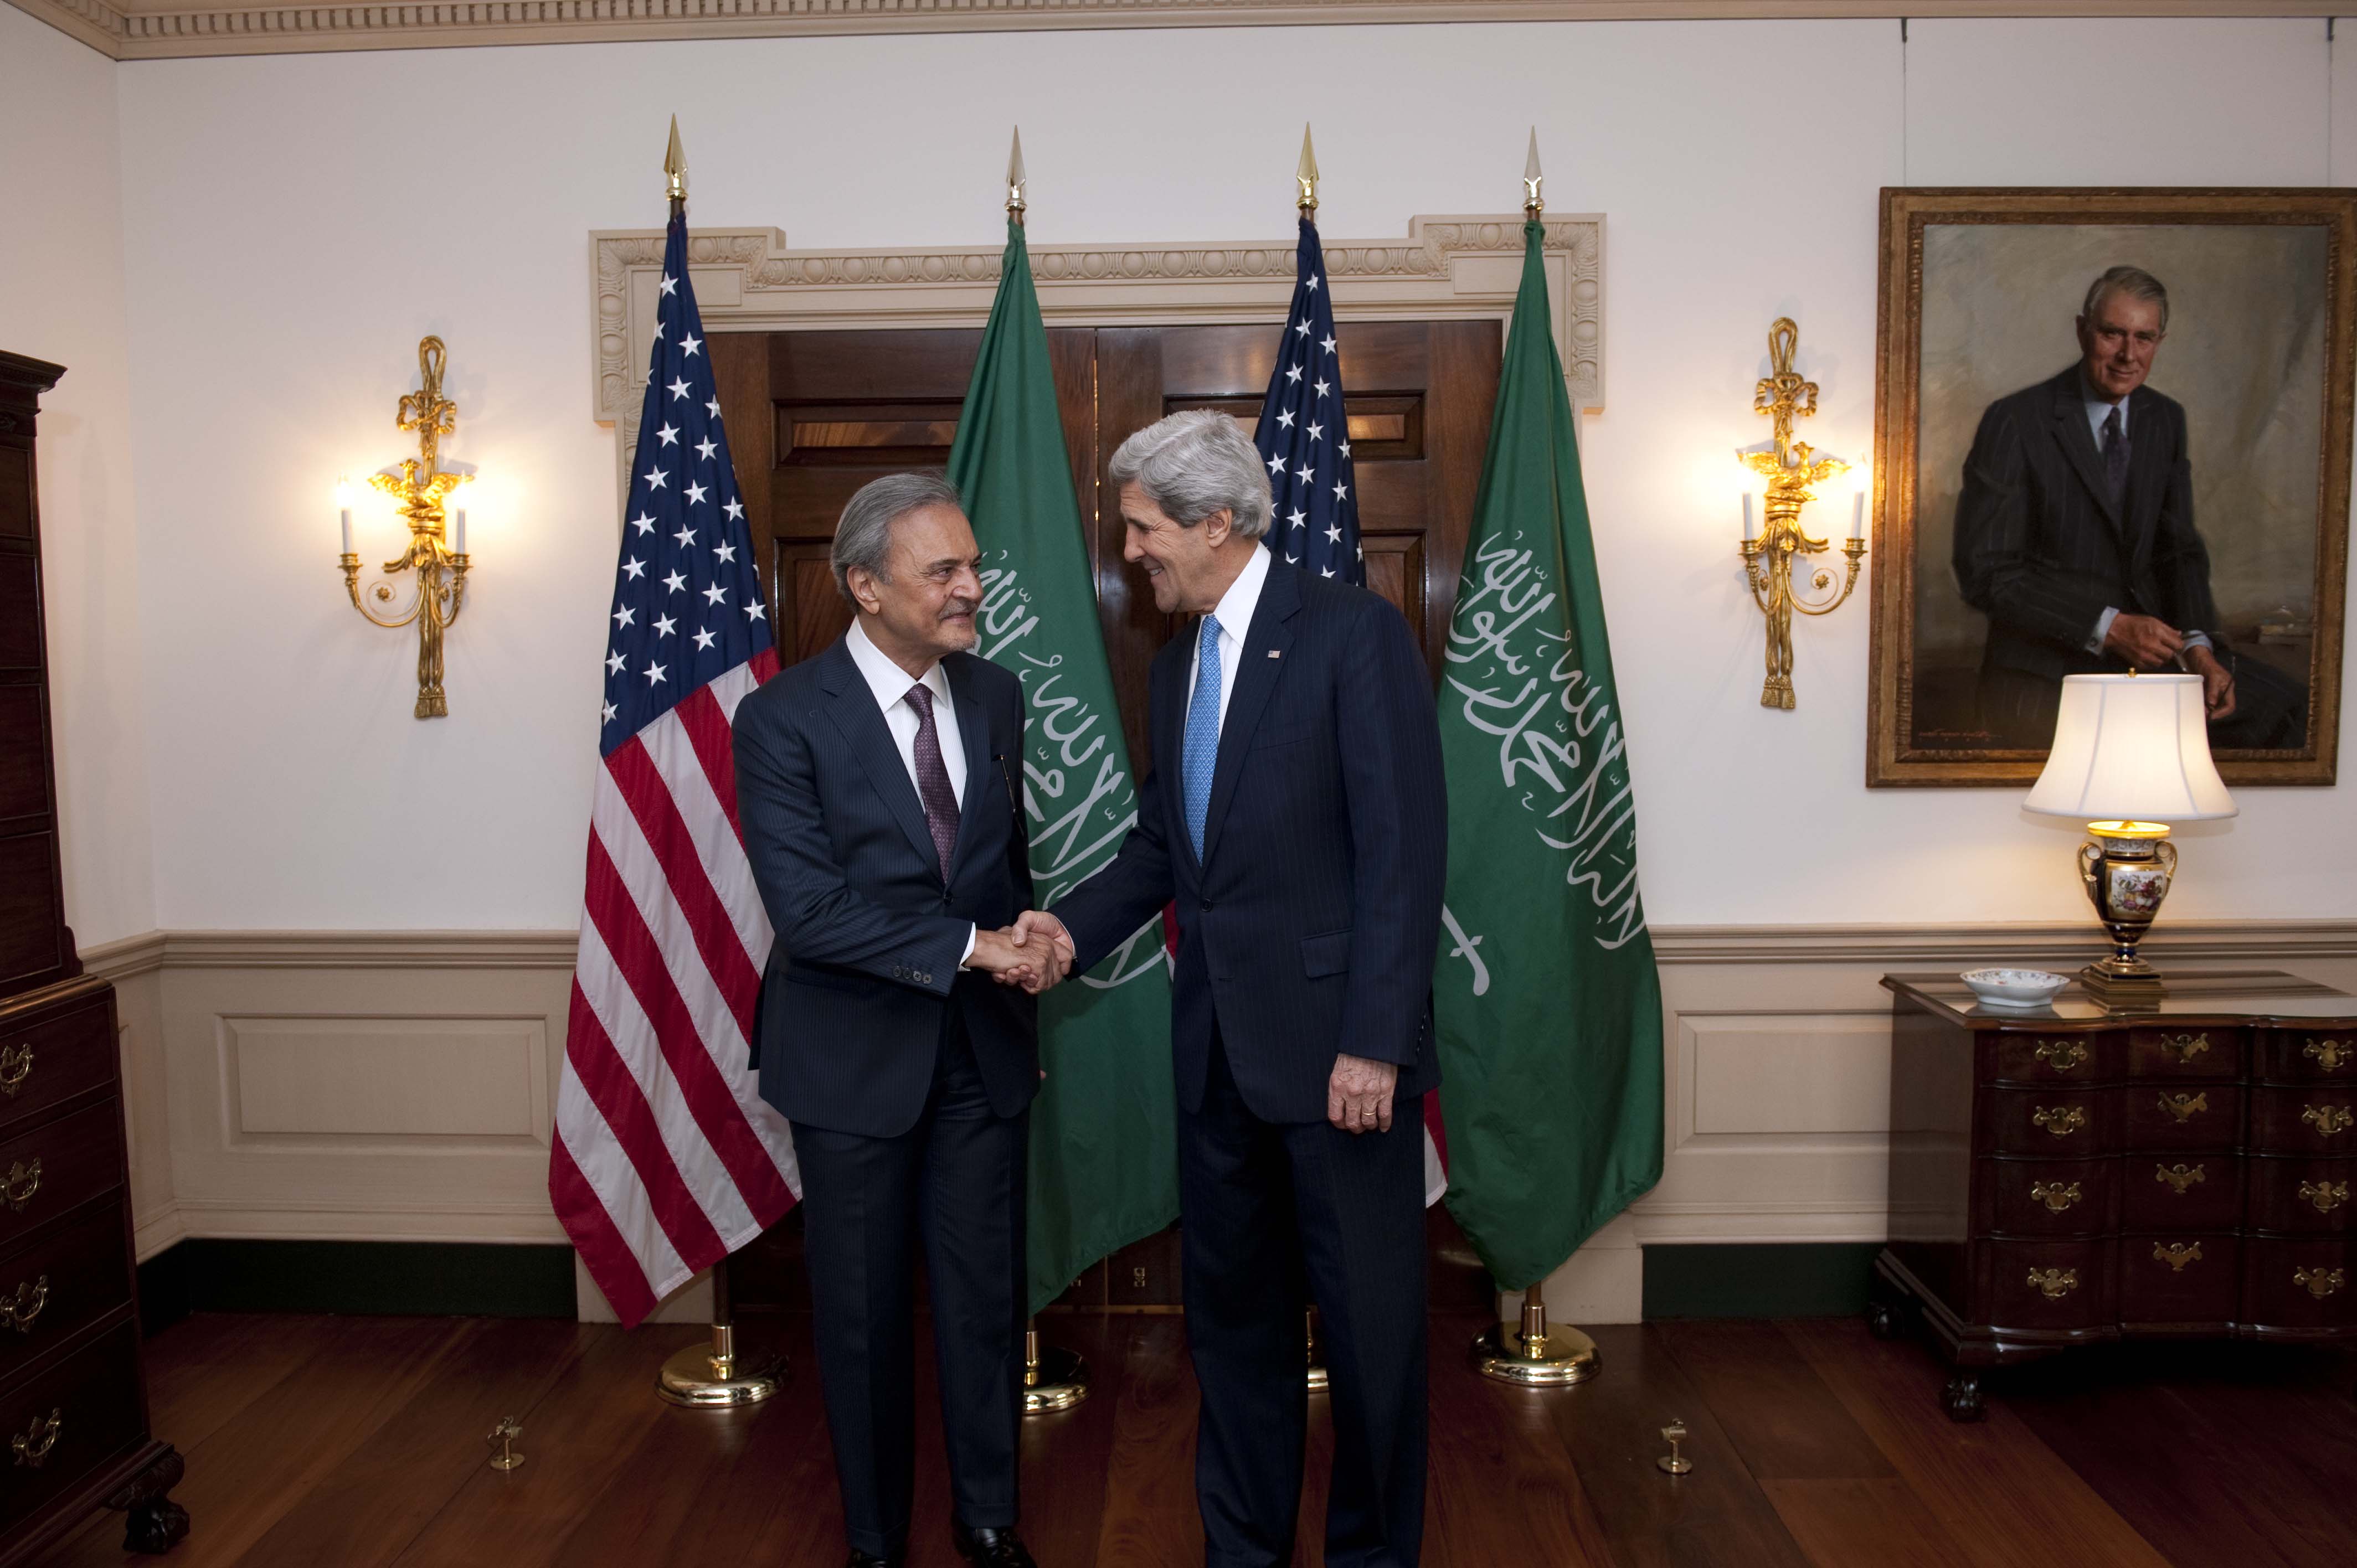 U.S. Secretary of State John Kerry holds a bilateral meeting with Saudi Foreign Minister Saud al-Faisal at the U.S. Department of State in Washington, D.C., on April 16, 2013